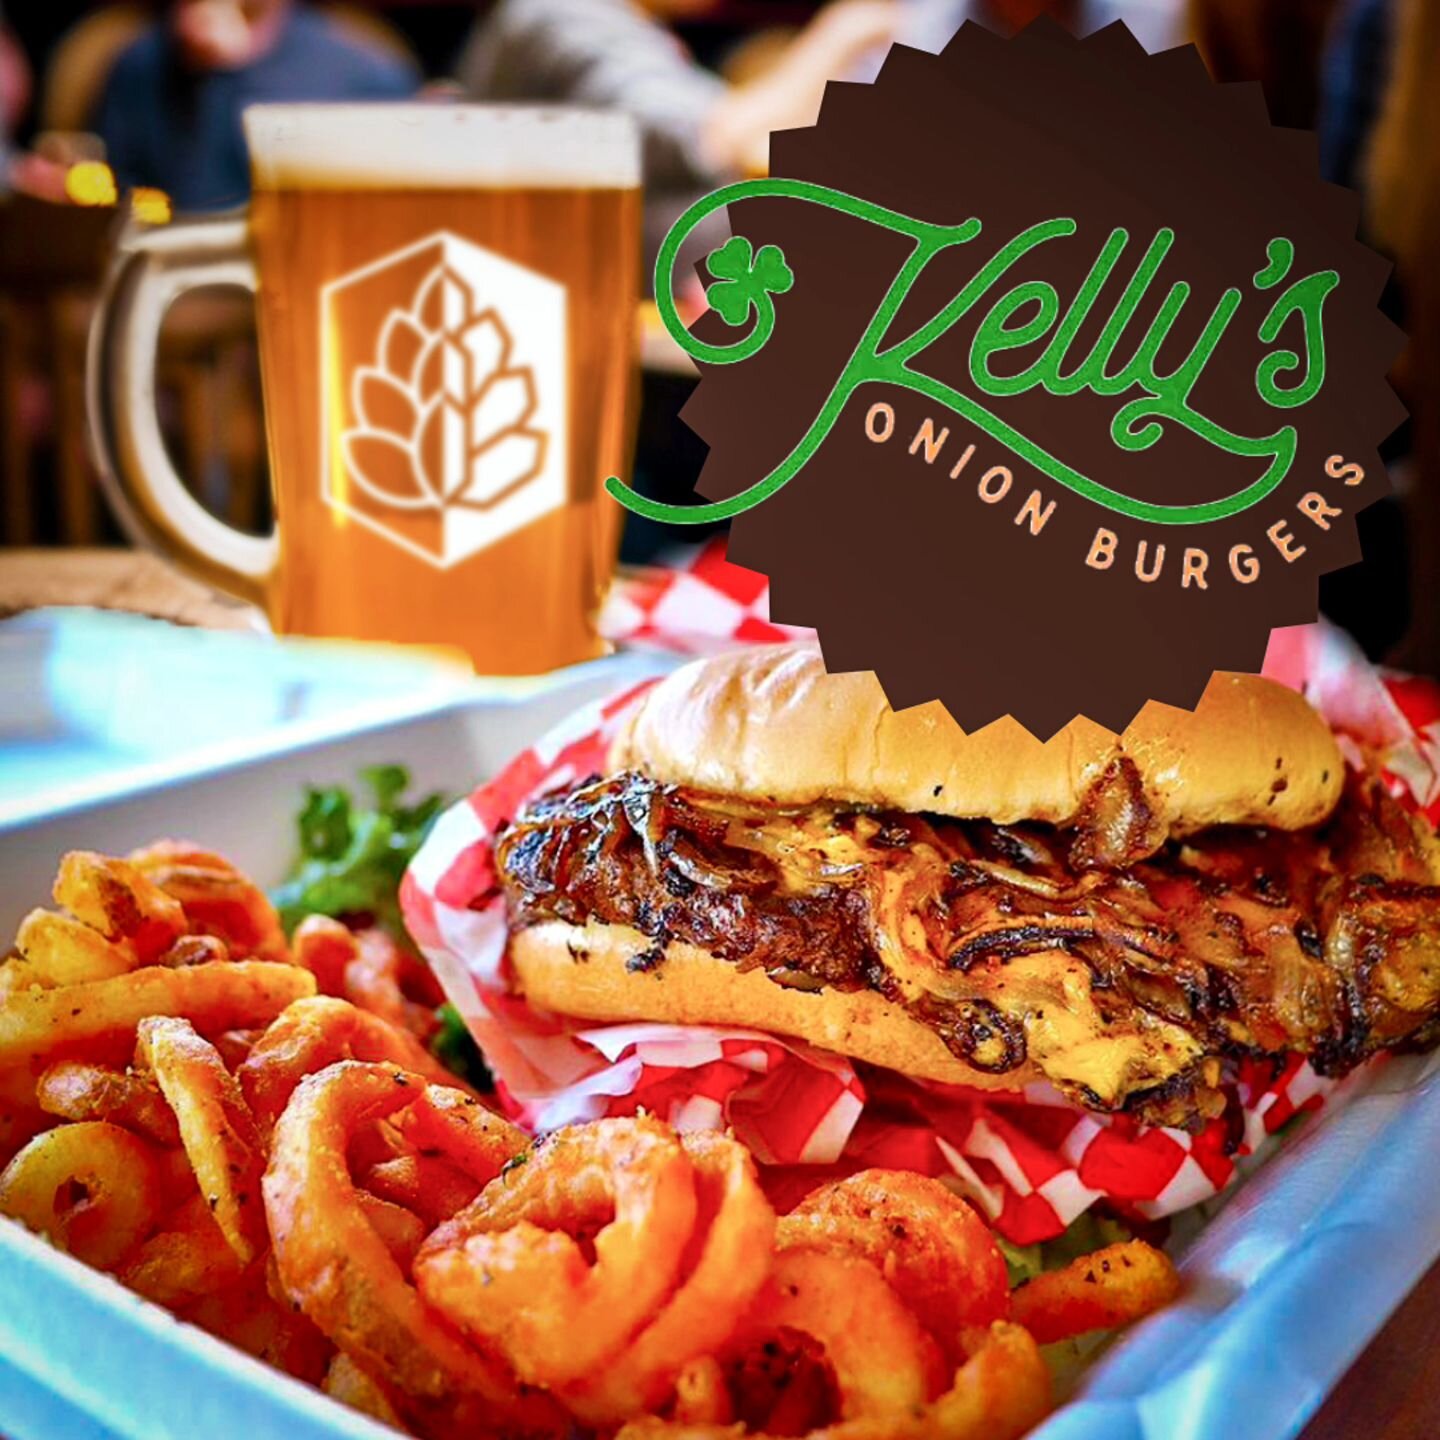 We're keeping the scrumptiousness rolling today with @kellysonionburgers at 3 pm! 

We've got #marchmadness playing on all the screens, so join us for game time and grab a pint and a burger.

Don't forget tomorrow we'll have MIMOSAS available and $1 